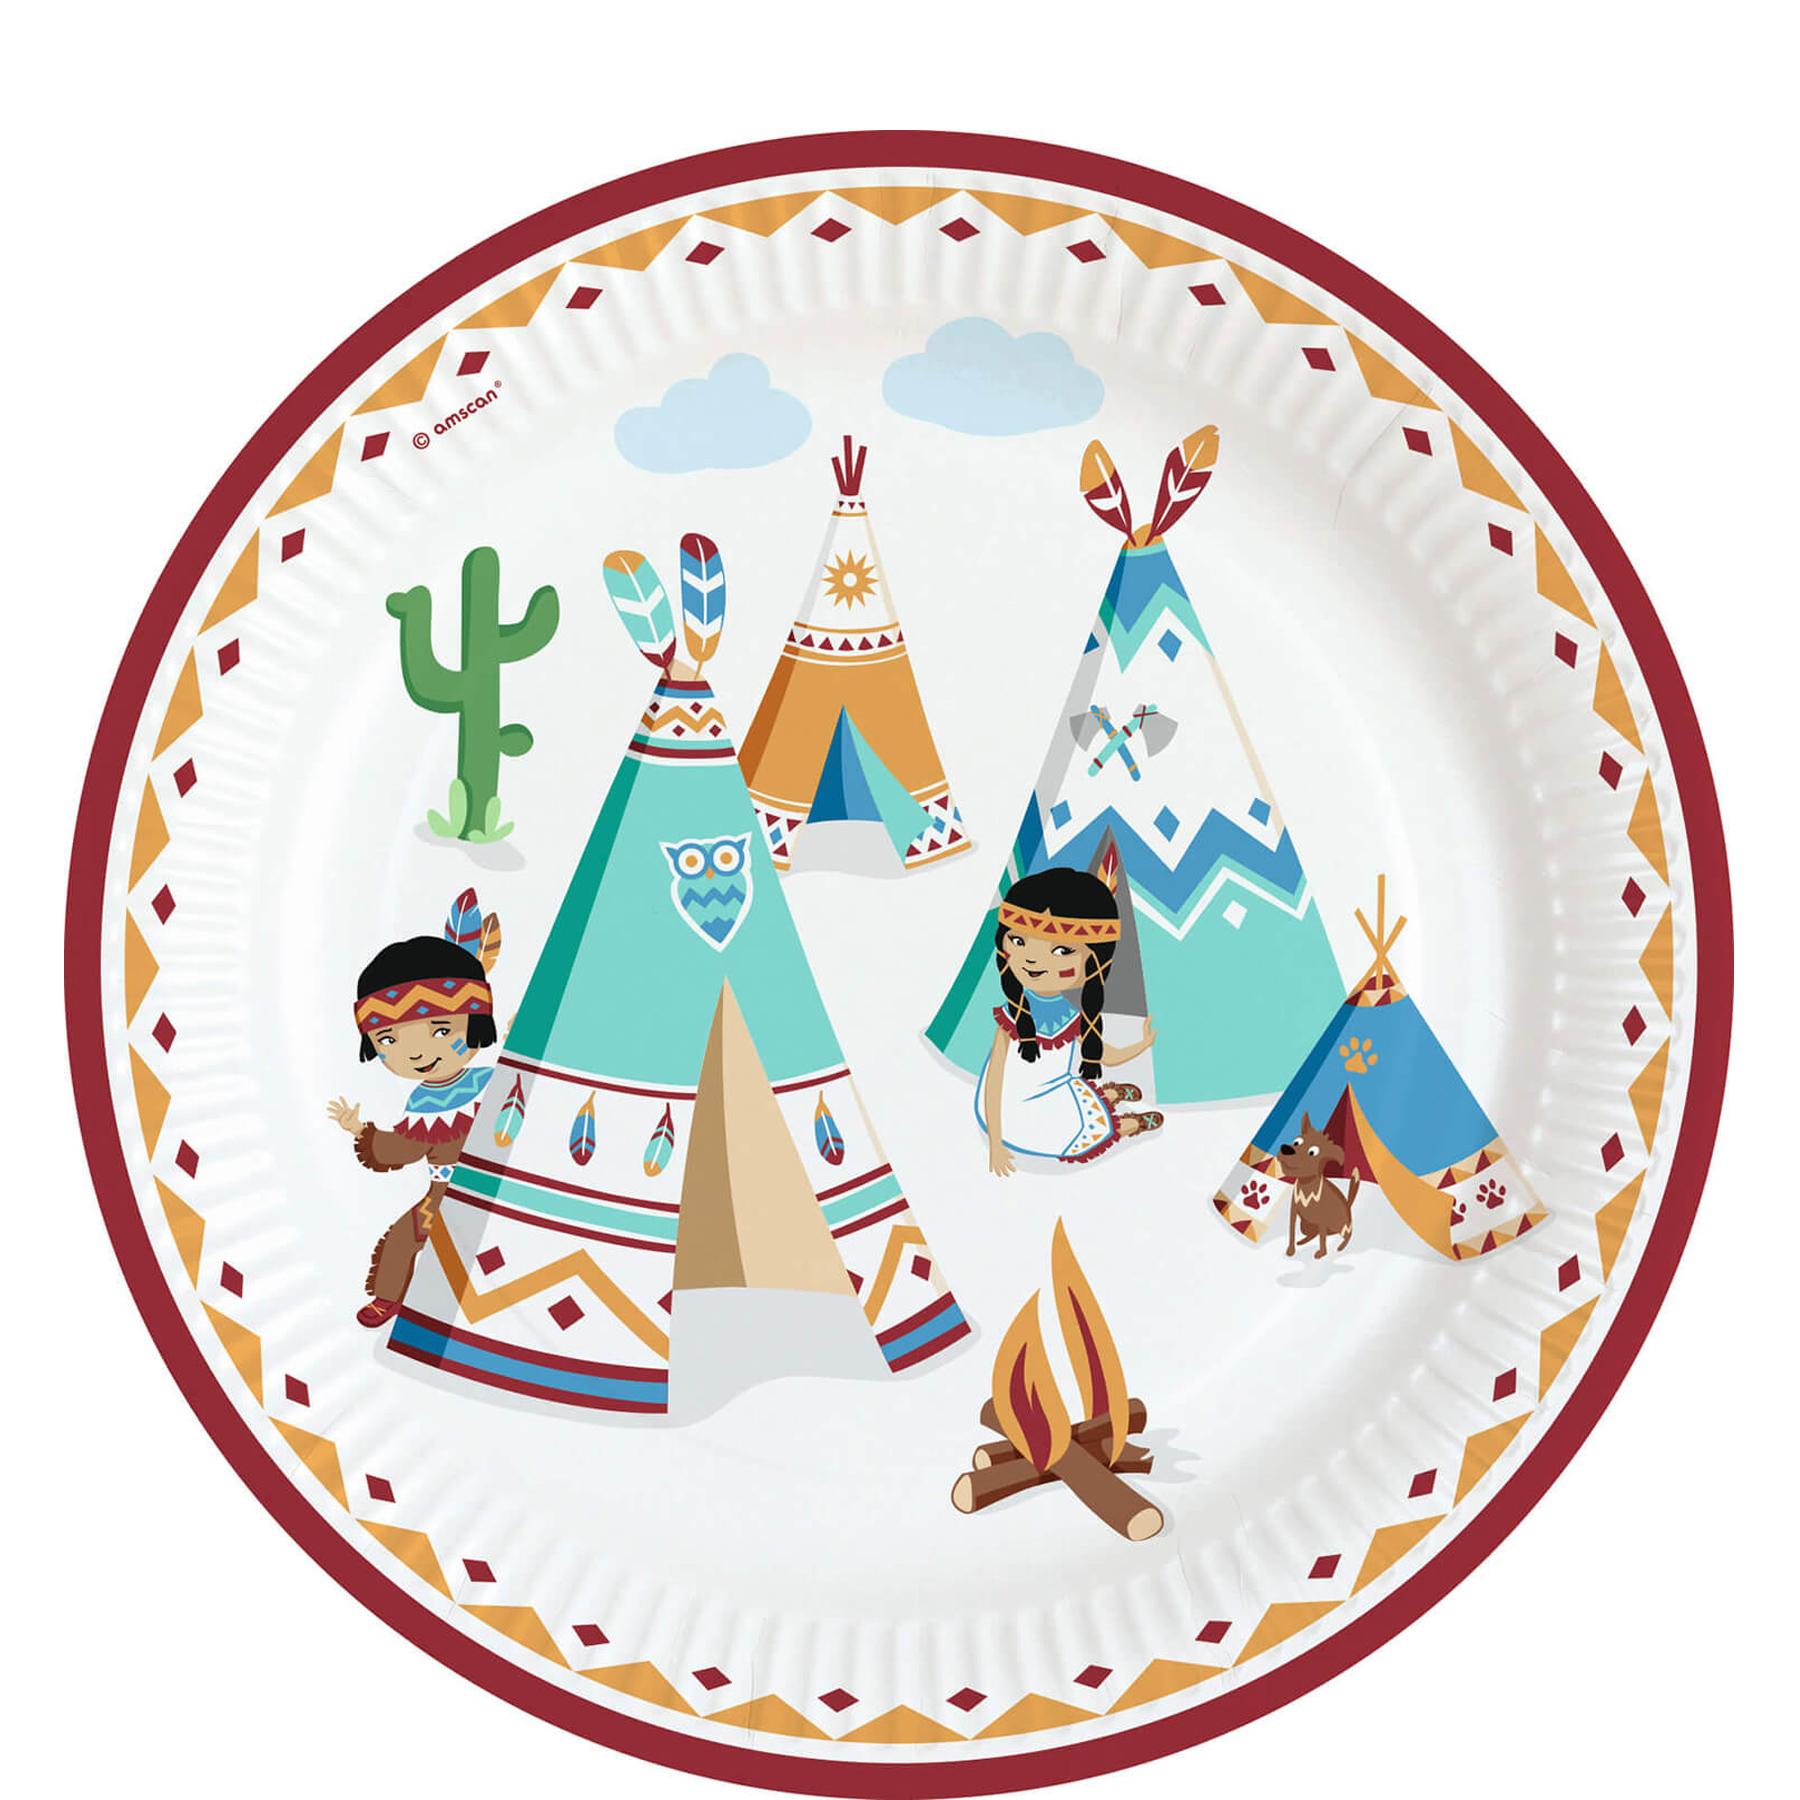 Tepee & Tomahawk Paper Plates 9in, 8pcs Printed Tableware - Party Centre